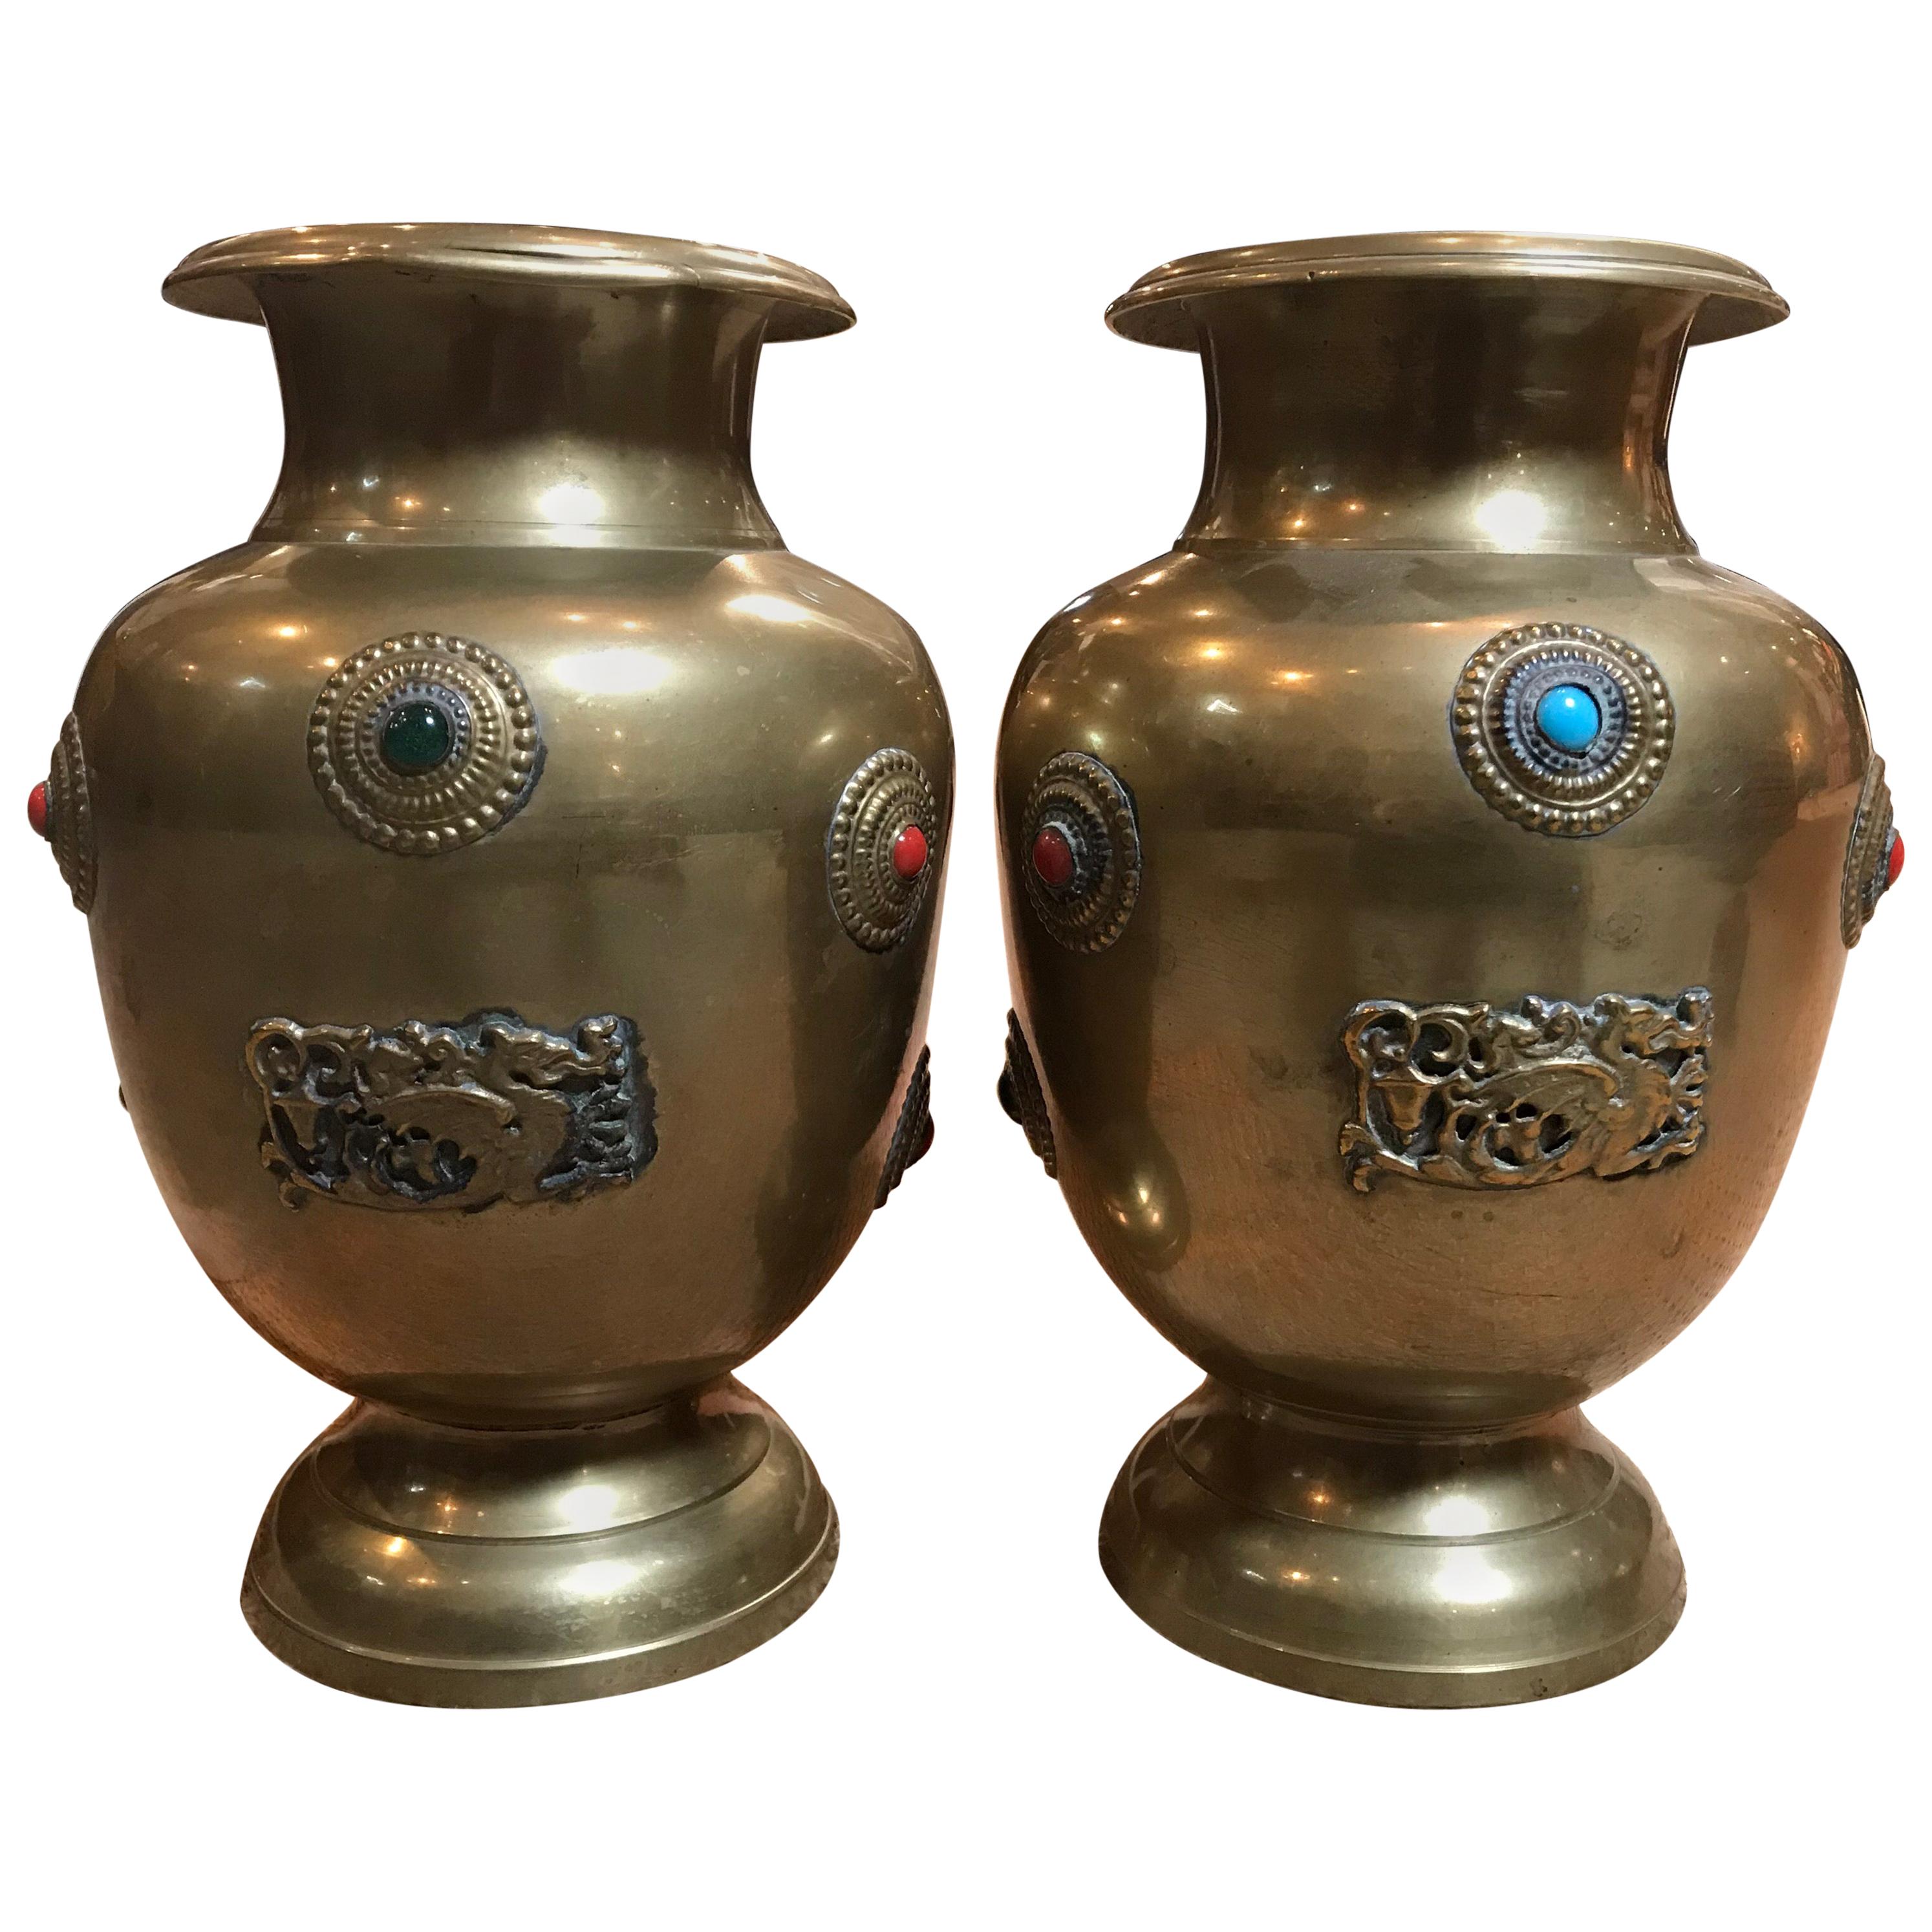 Brass Urns with Jewels and Dragon Emblem